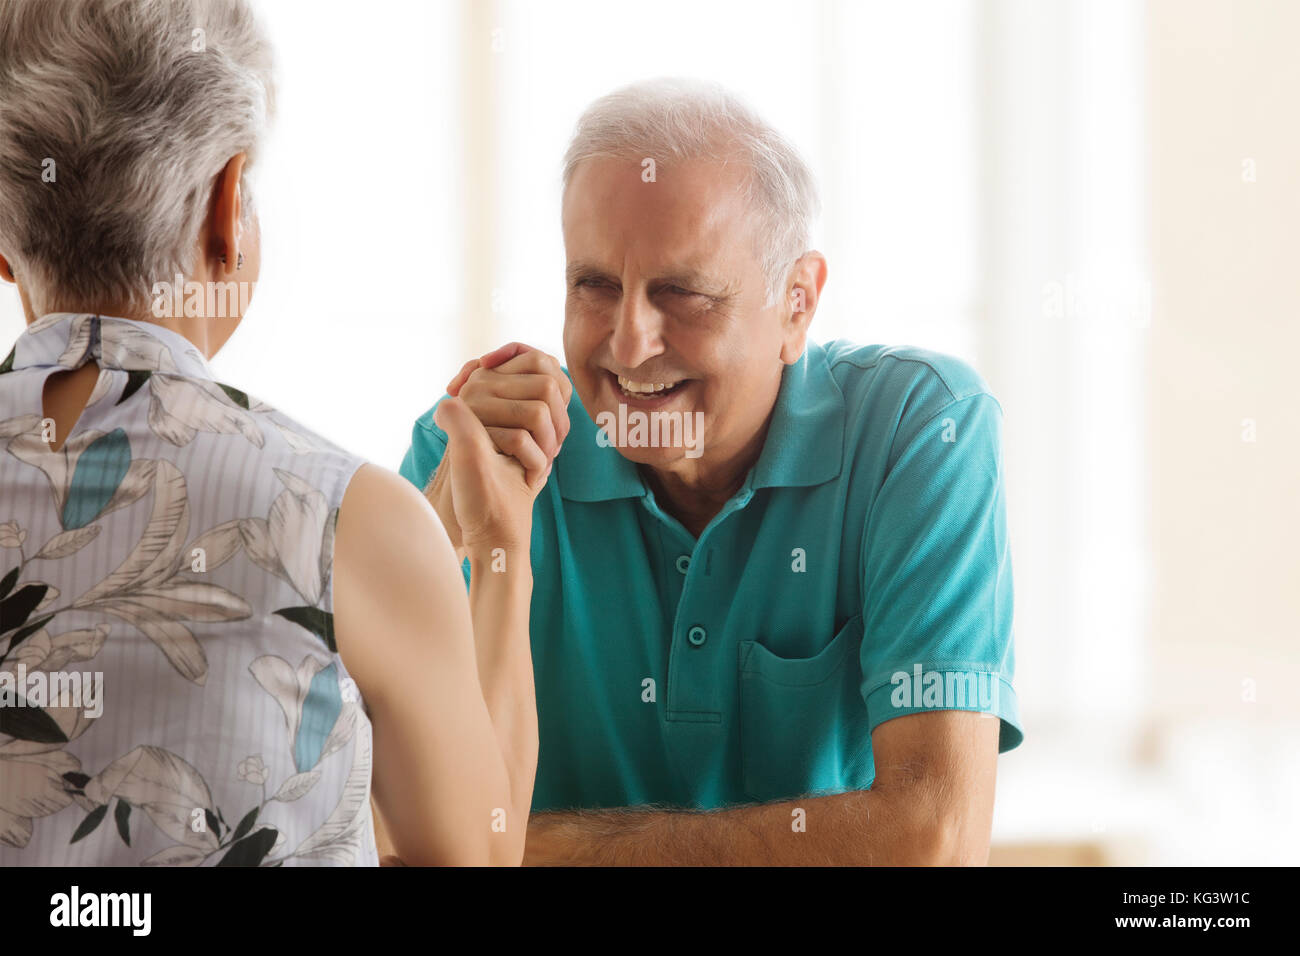 Senior couple Arm wrestling at table Banque D'Images